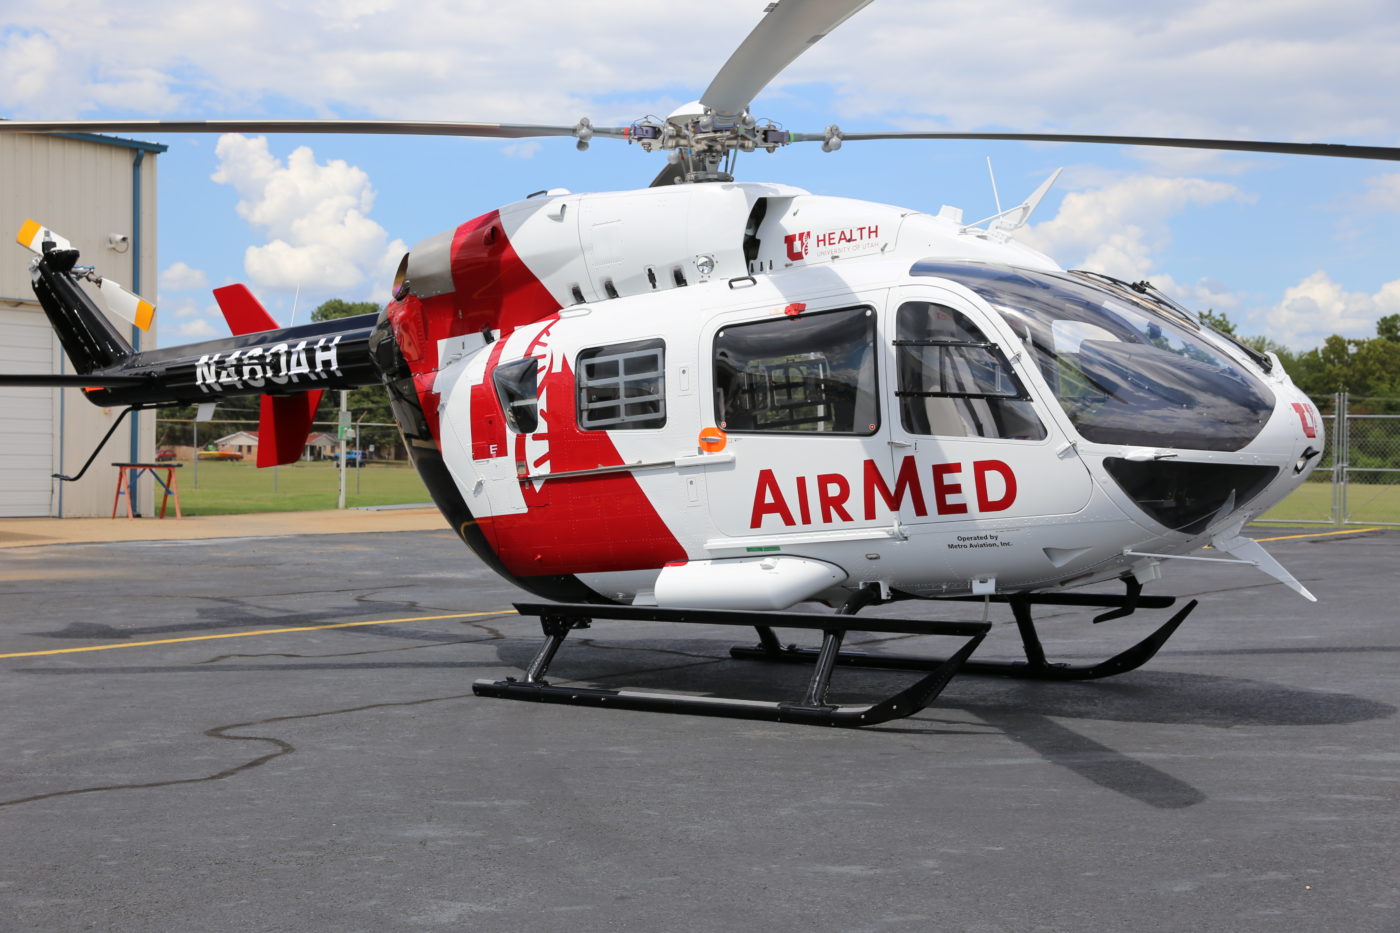 The new Airbus EC145 replaces a Bell 407 helicopter, and features standard air ambulance equipment. Metro Photo